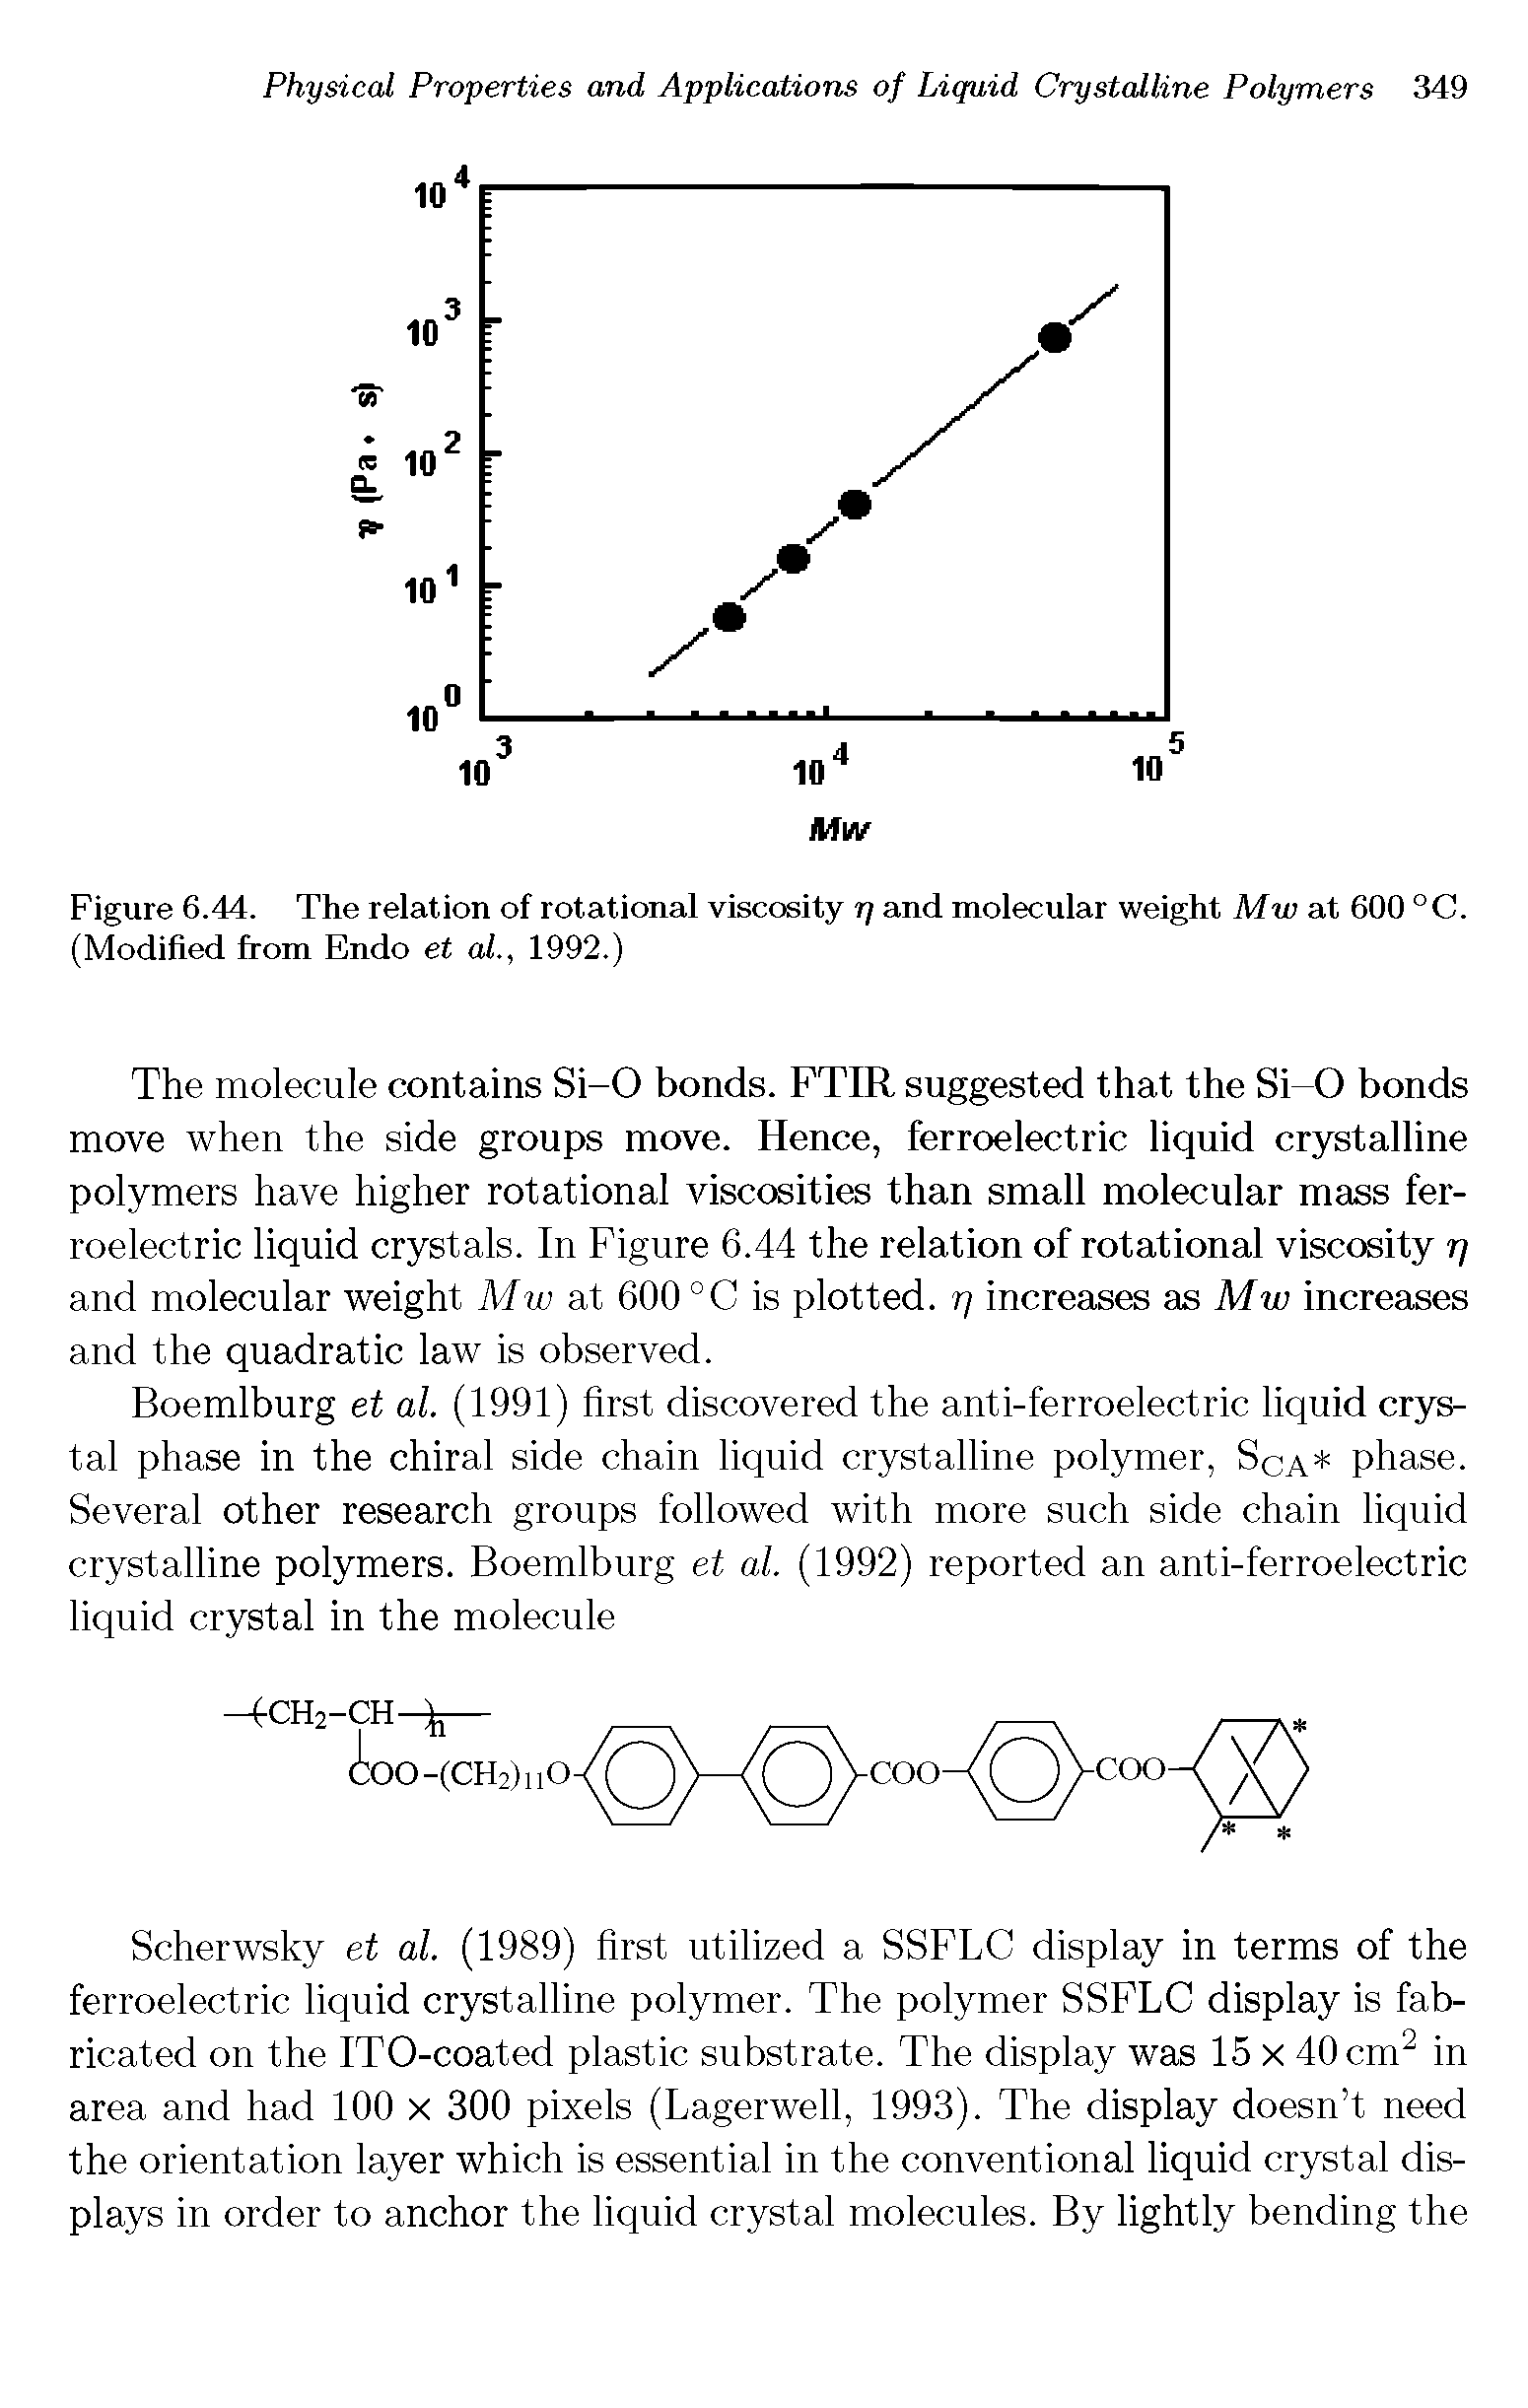 Figure 6.44. The relation of rotational viscosity r) and molecular weight Mw at 600 °C. (Modified from Endo et al., 1992.)...